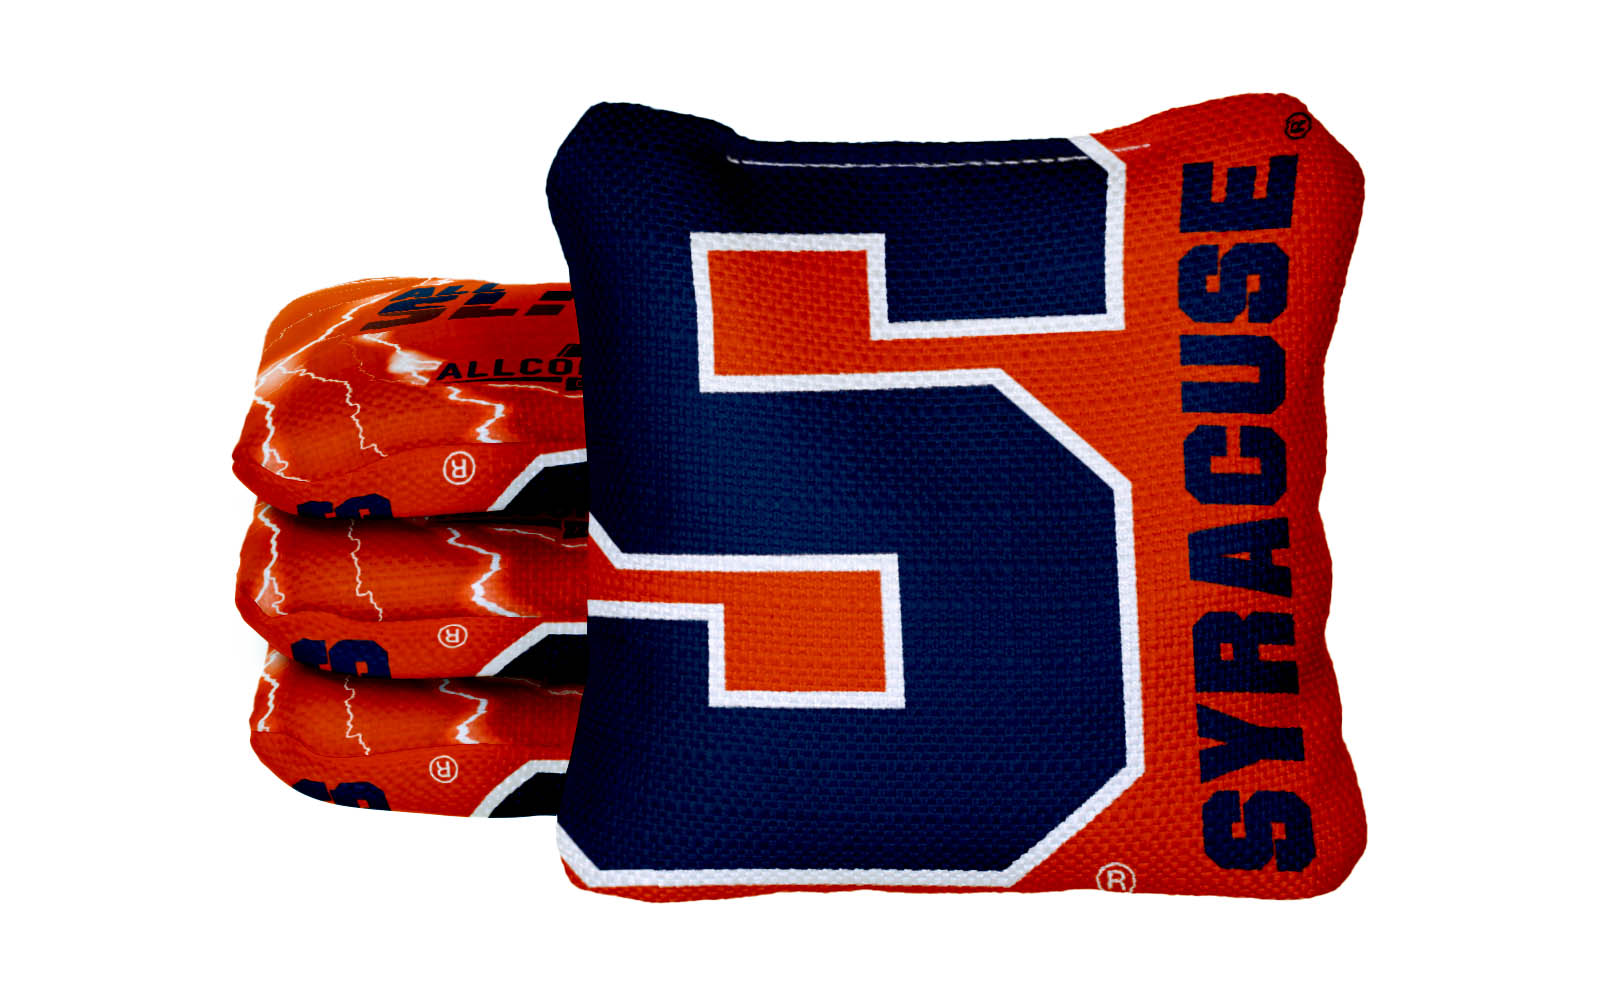 Officially Licensed Collegiate Cornhole Bags - All-Slide 2.0 - Set of 4 - Syracuse University